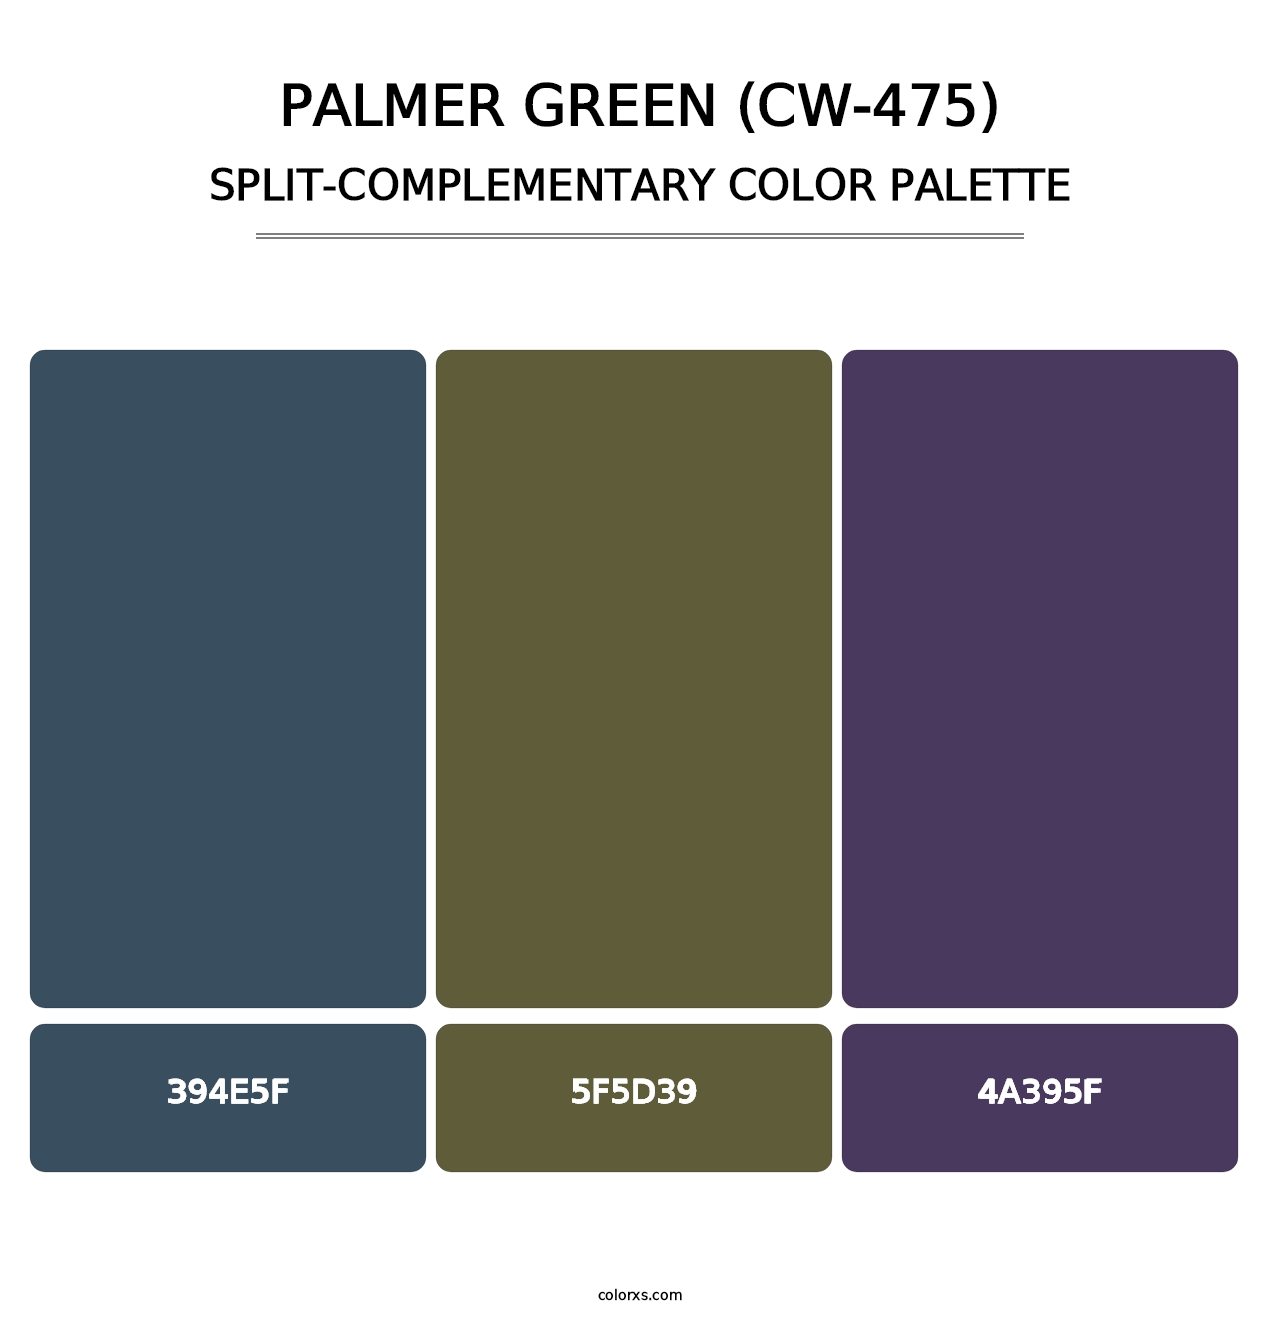 Palmer Green (CW-475) - Split-Complementary Color Palette